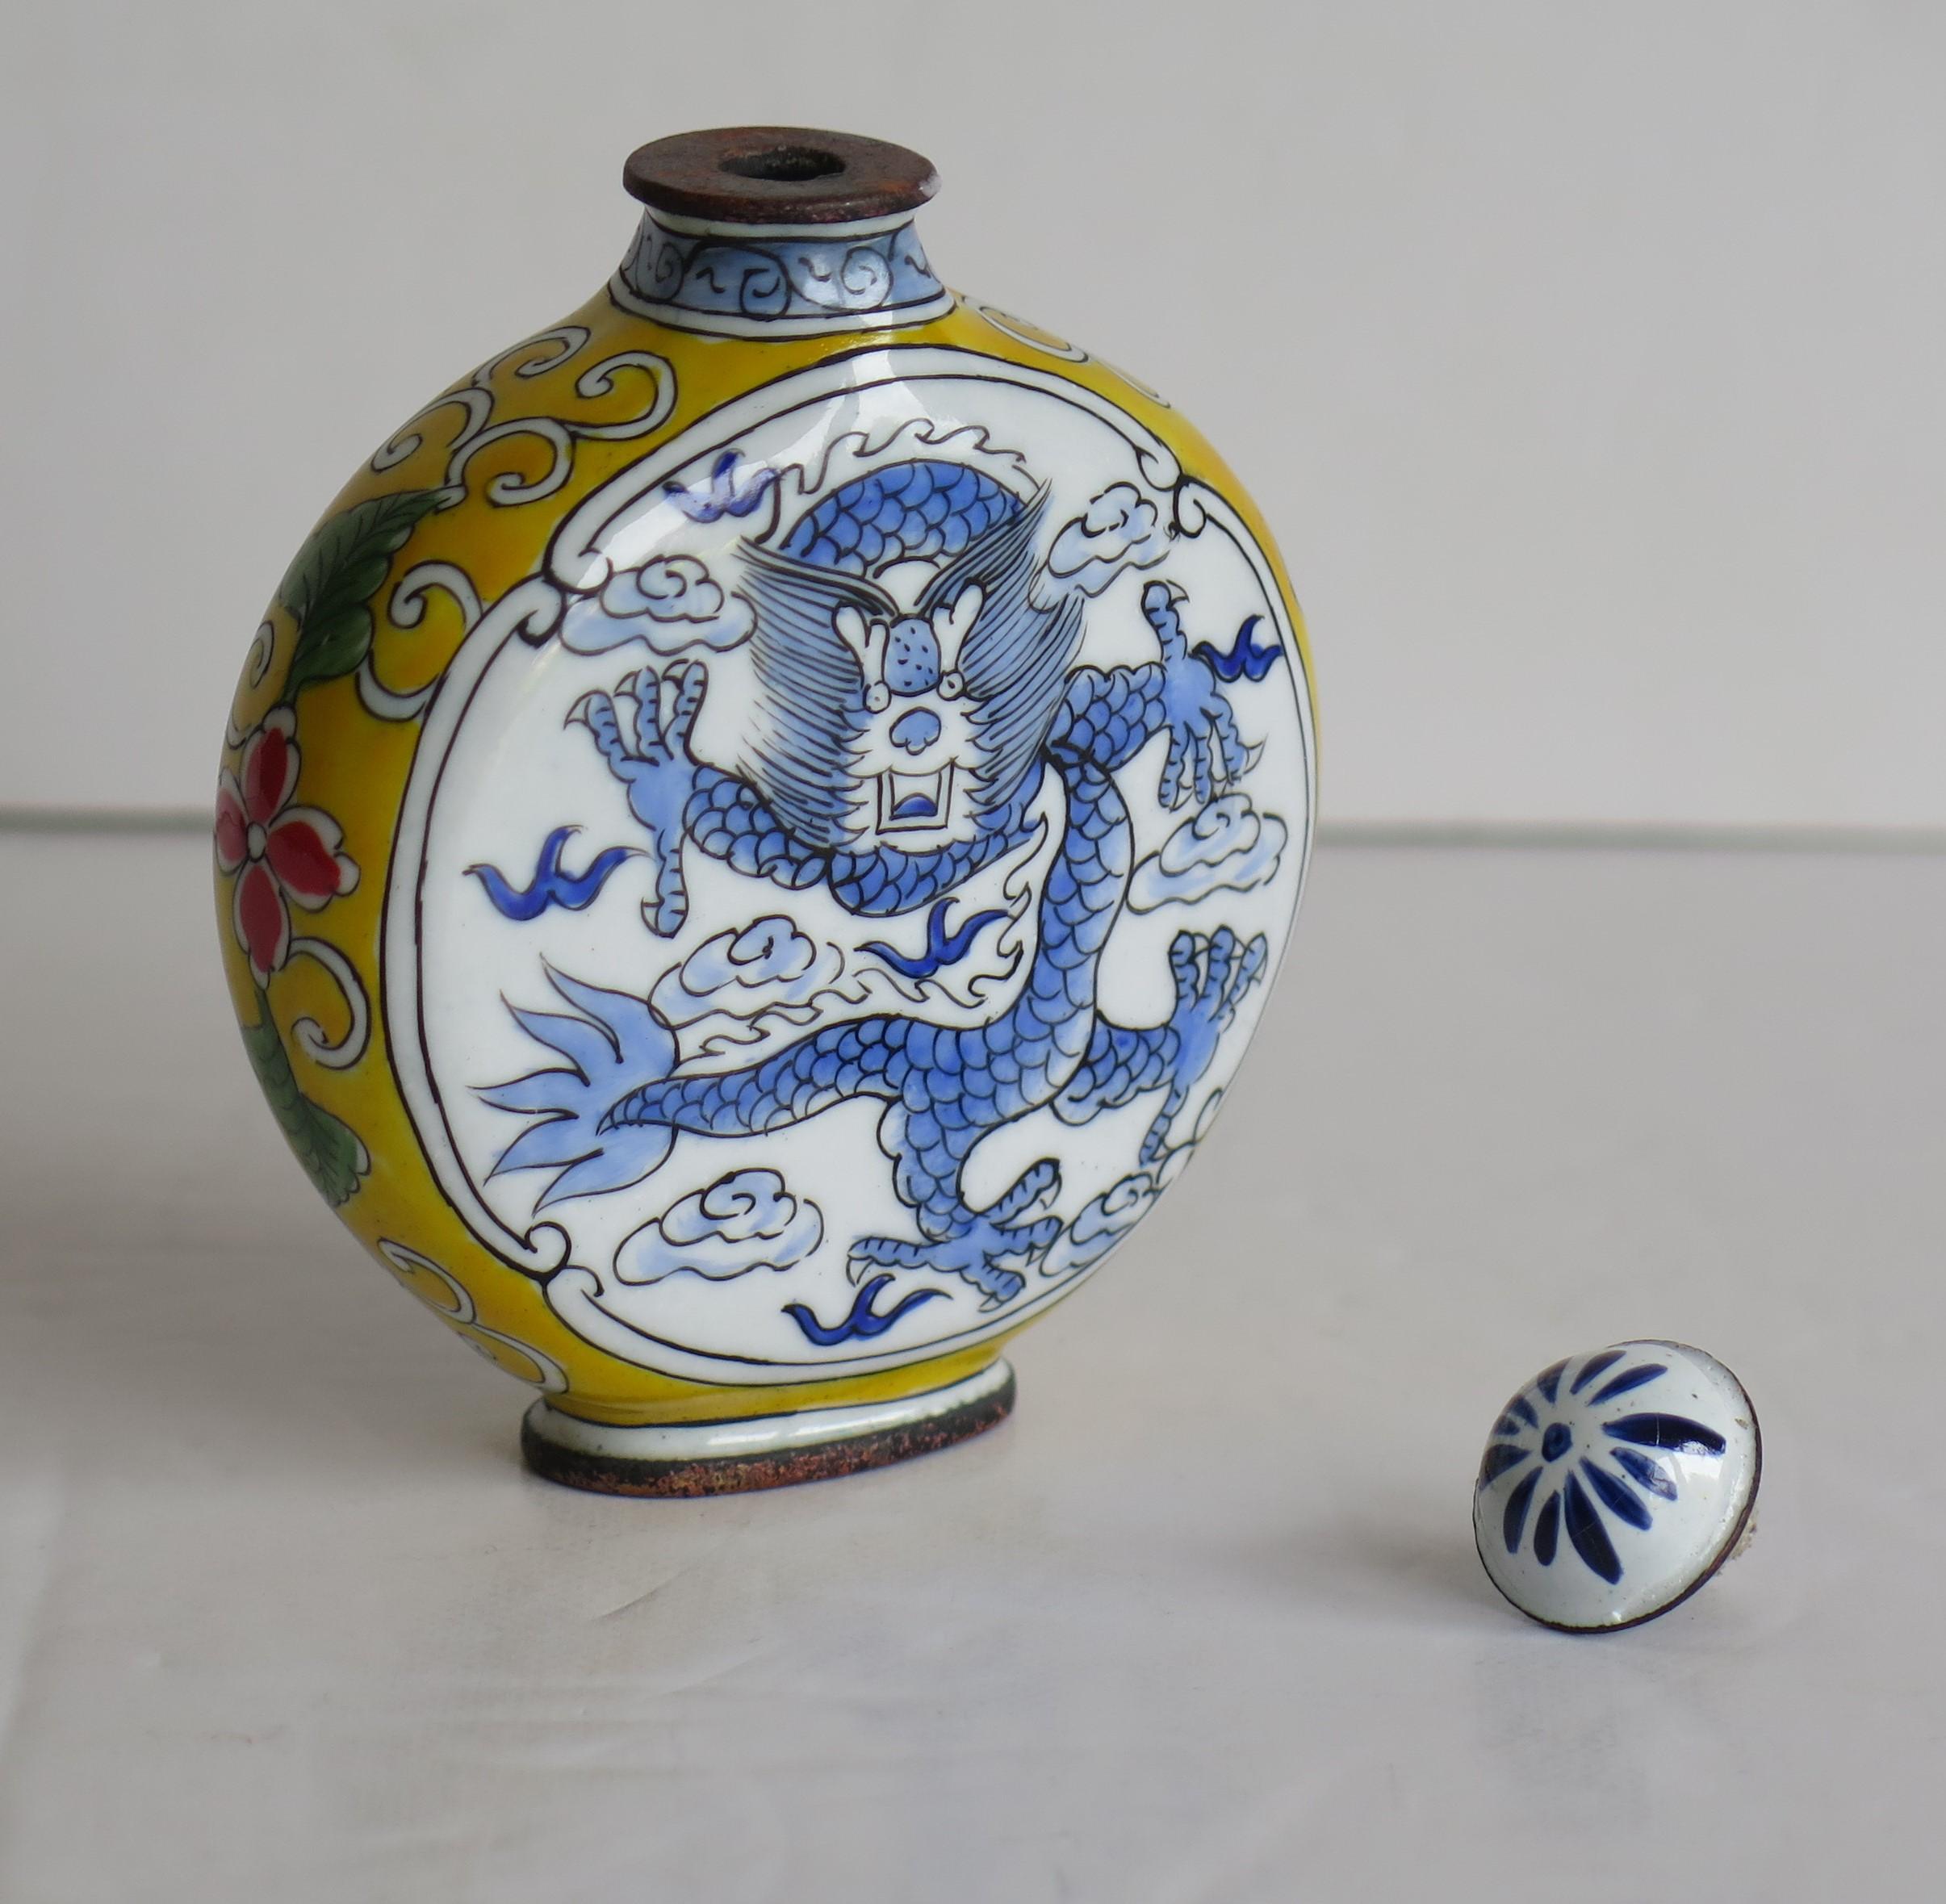 Chinese Snuff Bottle Hand Enamelled Dragon on Copper 4-Cha'r Mark, circa 1940s 7